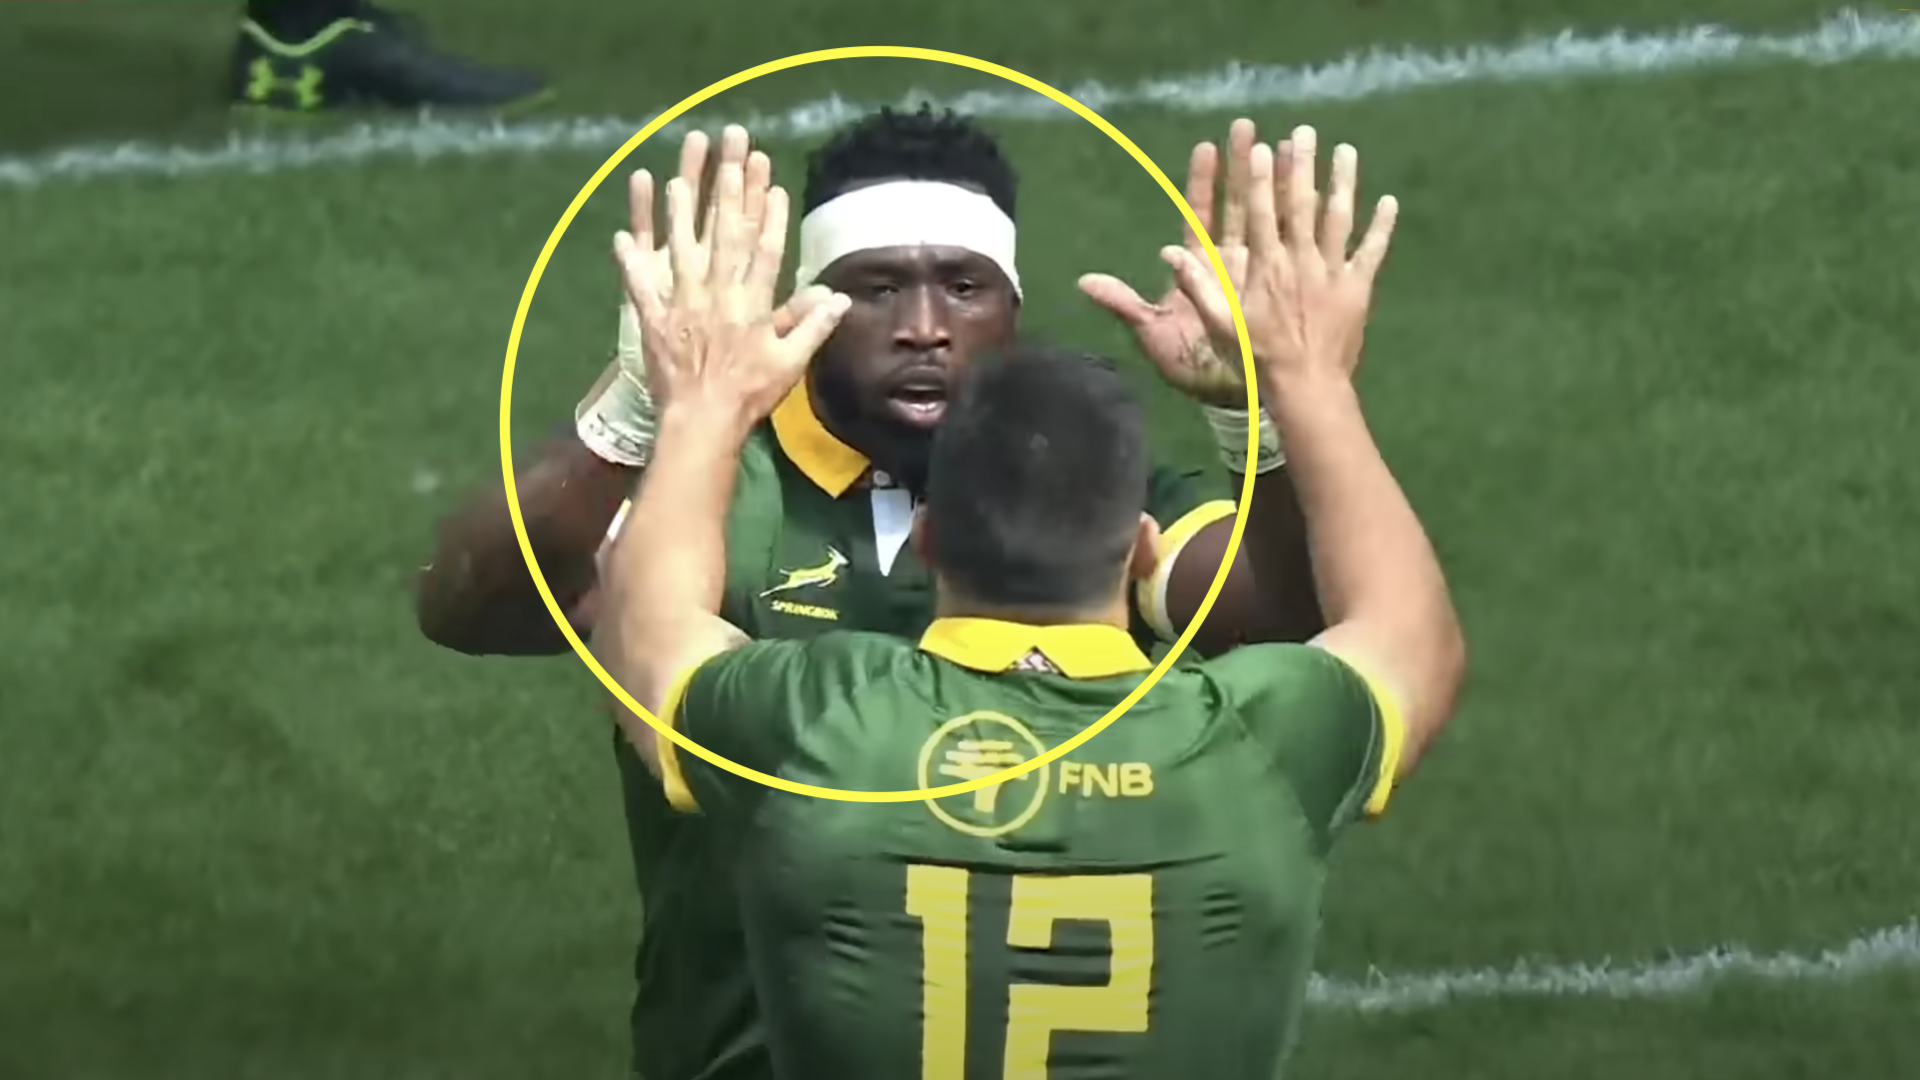 WATCH: Officially the most compelling case for why the Boks will win World Cup